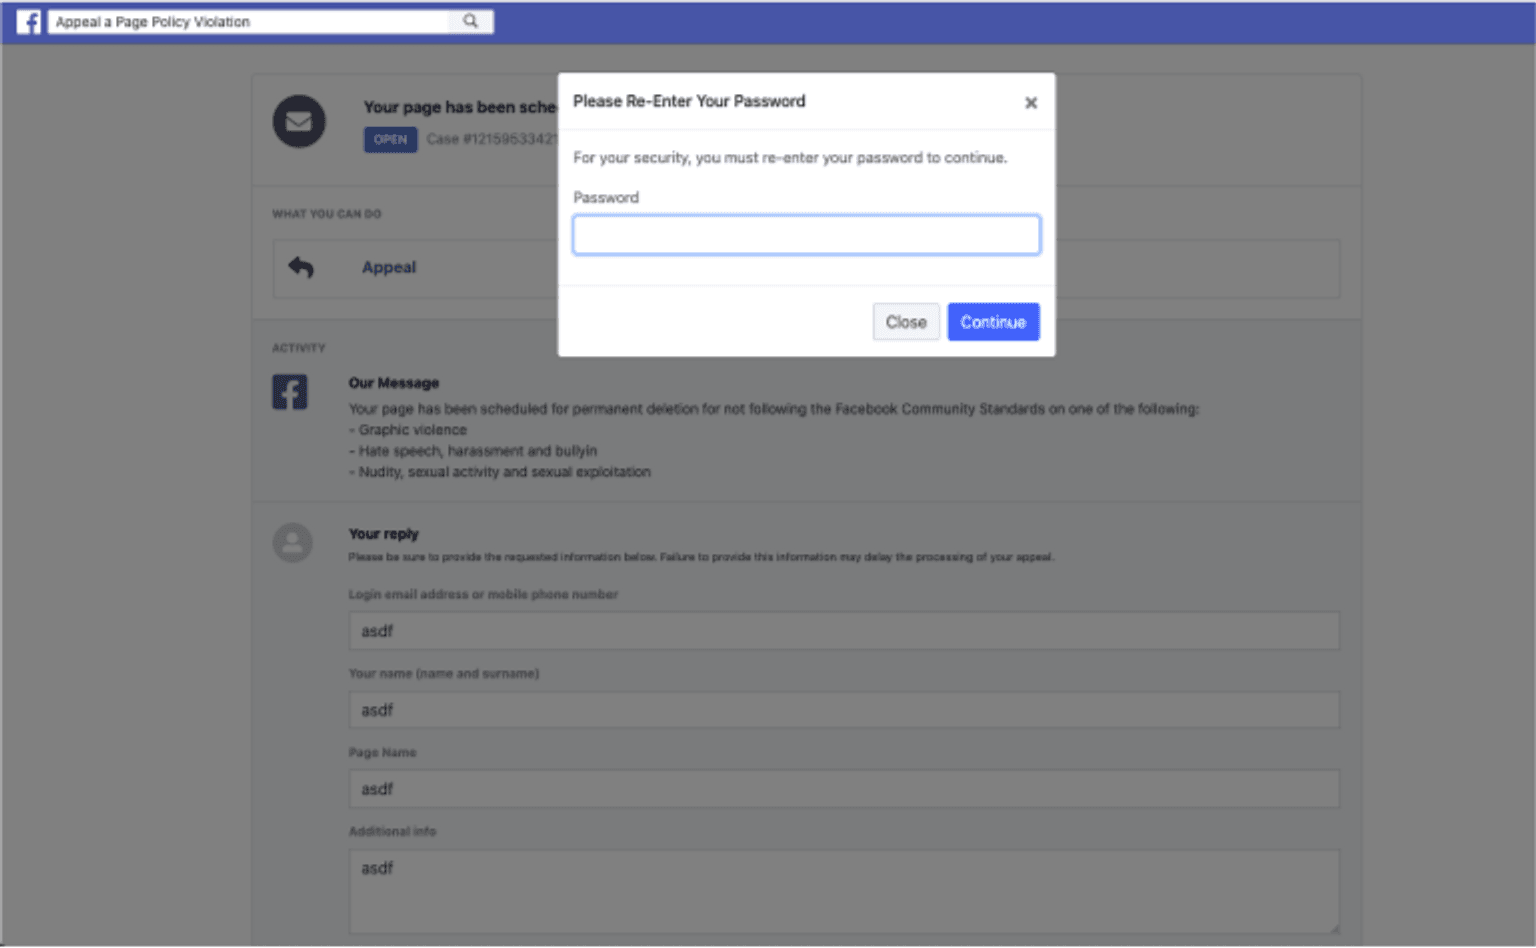 Fake Facebook page for credential phishing